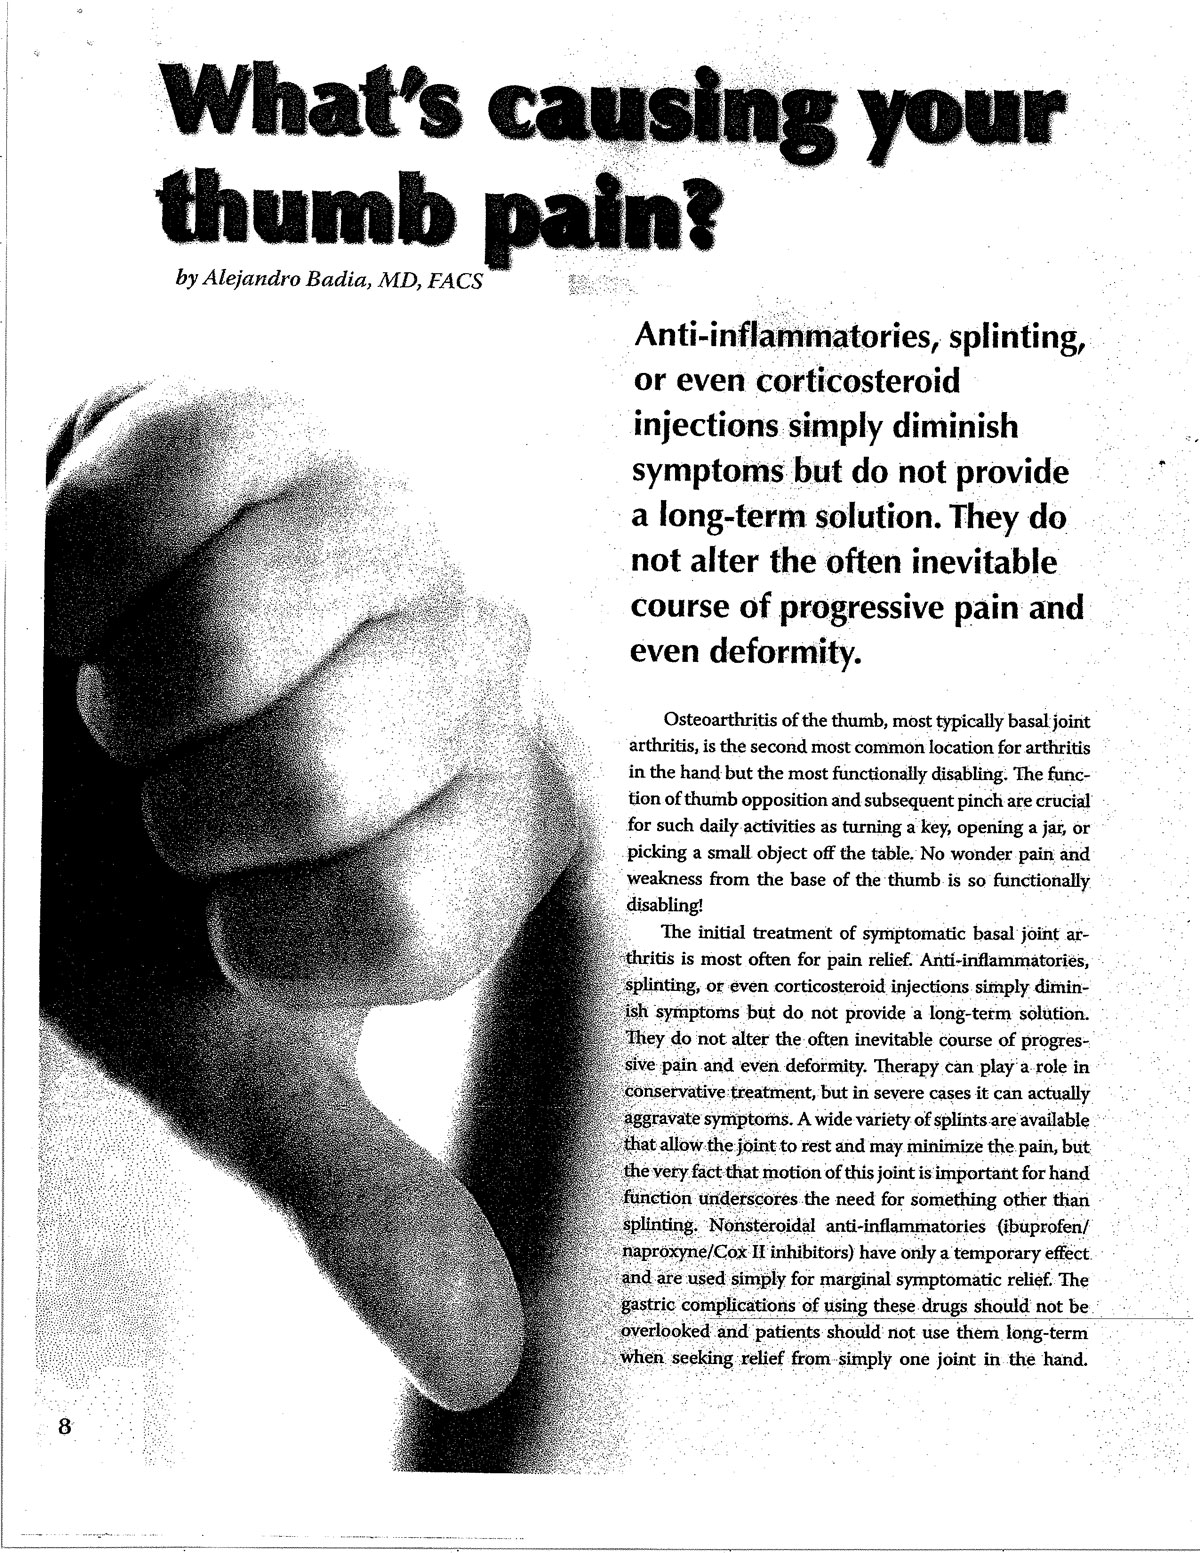 What's causing your thumb pain?